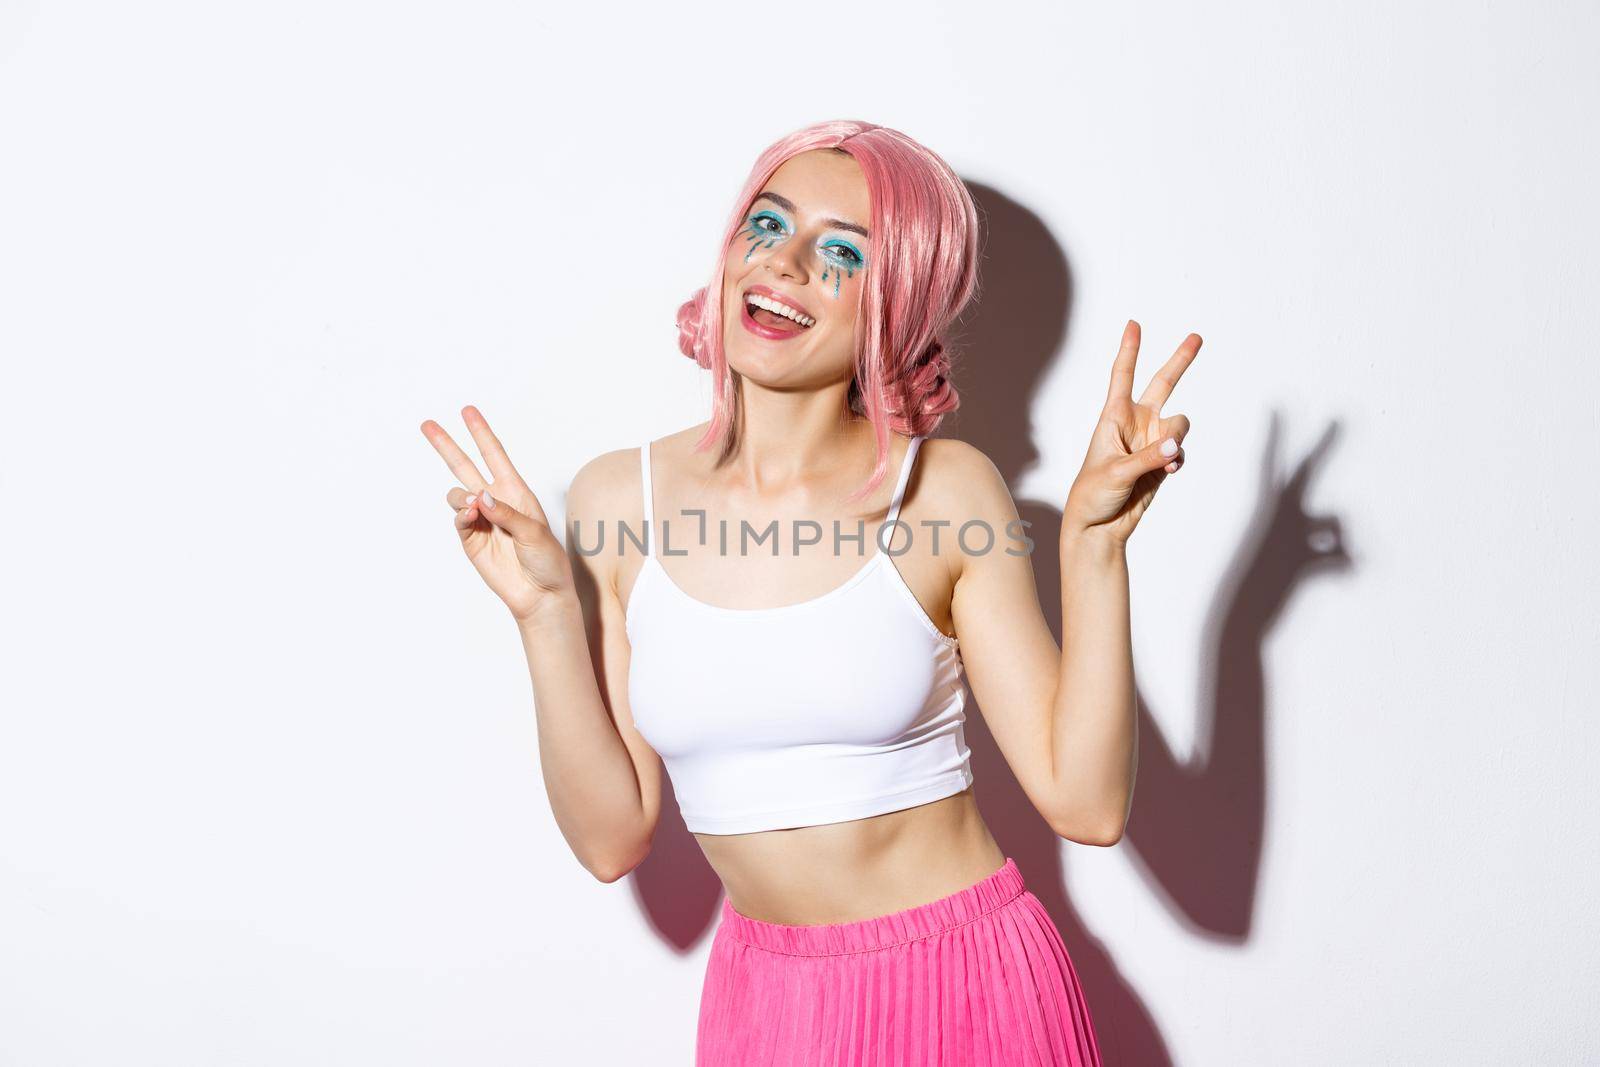 Portrait of beautiful smiling girl in pink wig, having fun on party, showing peace signs, celebrating holiday, standing over white background.